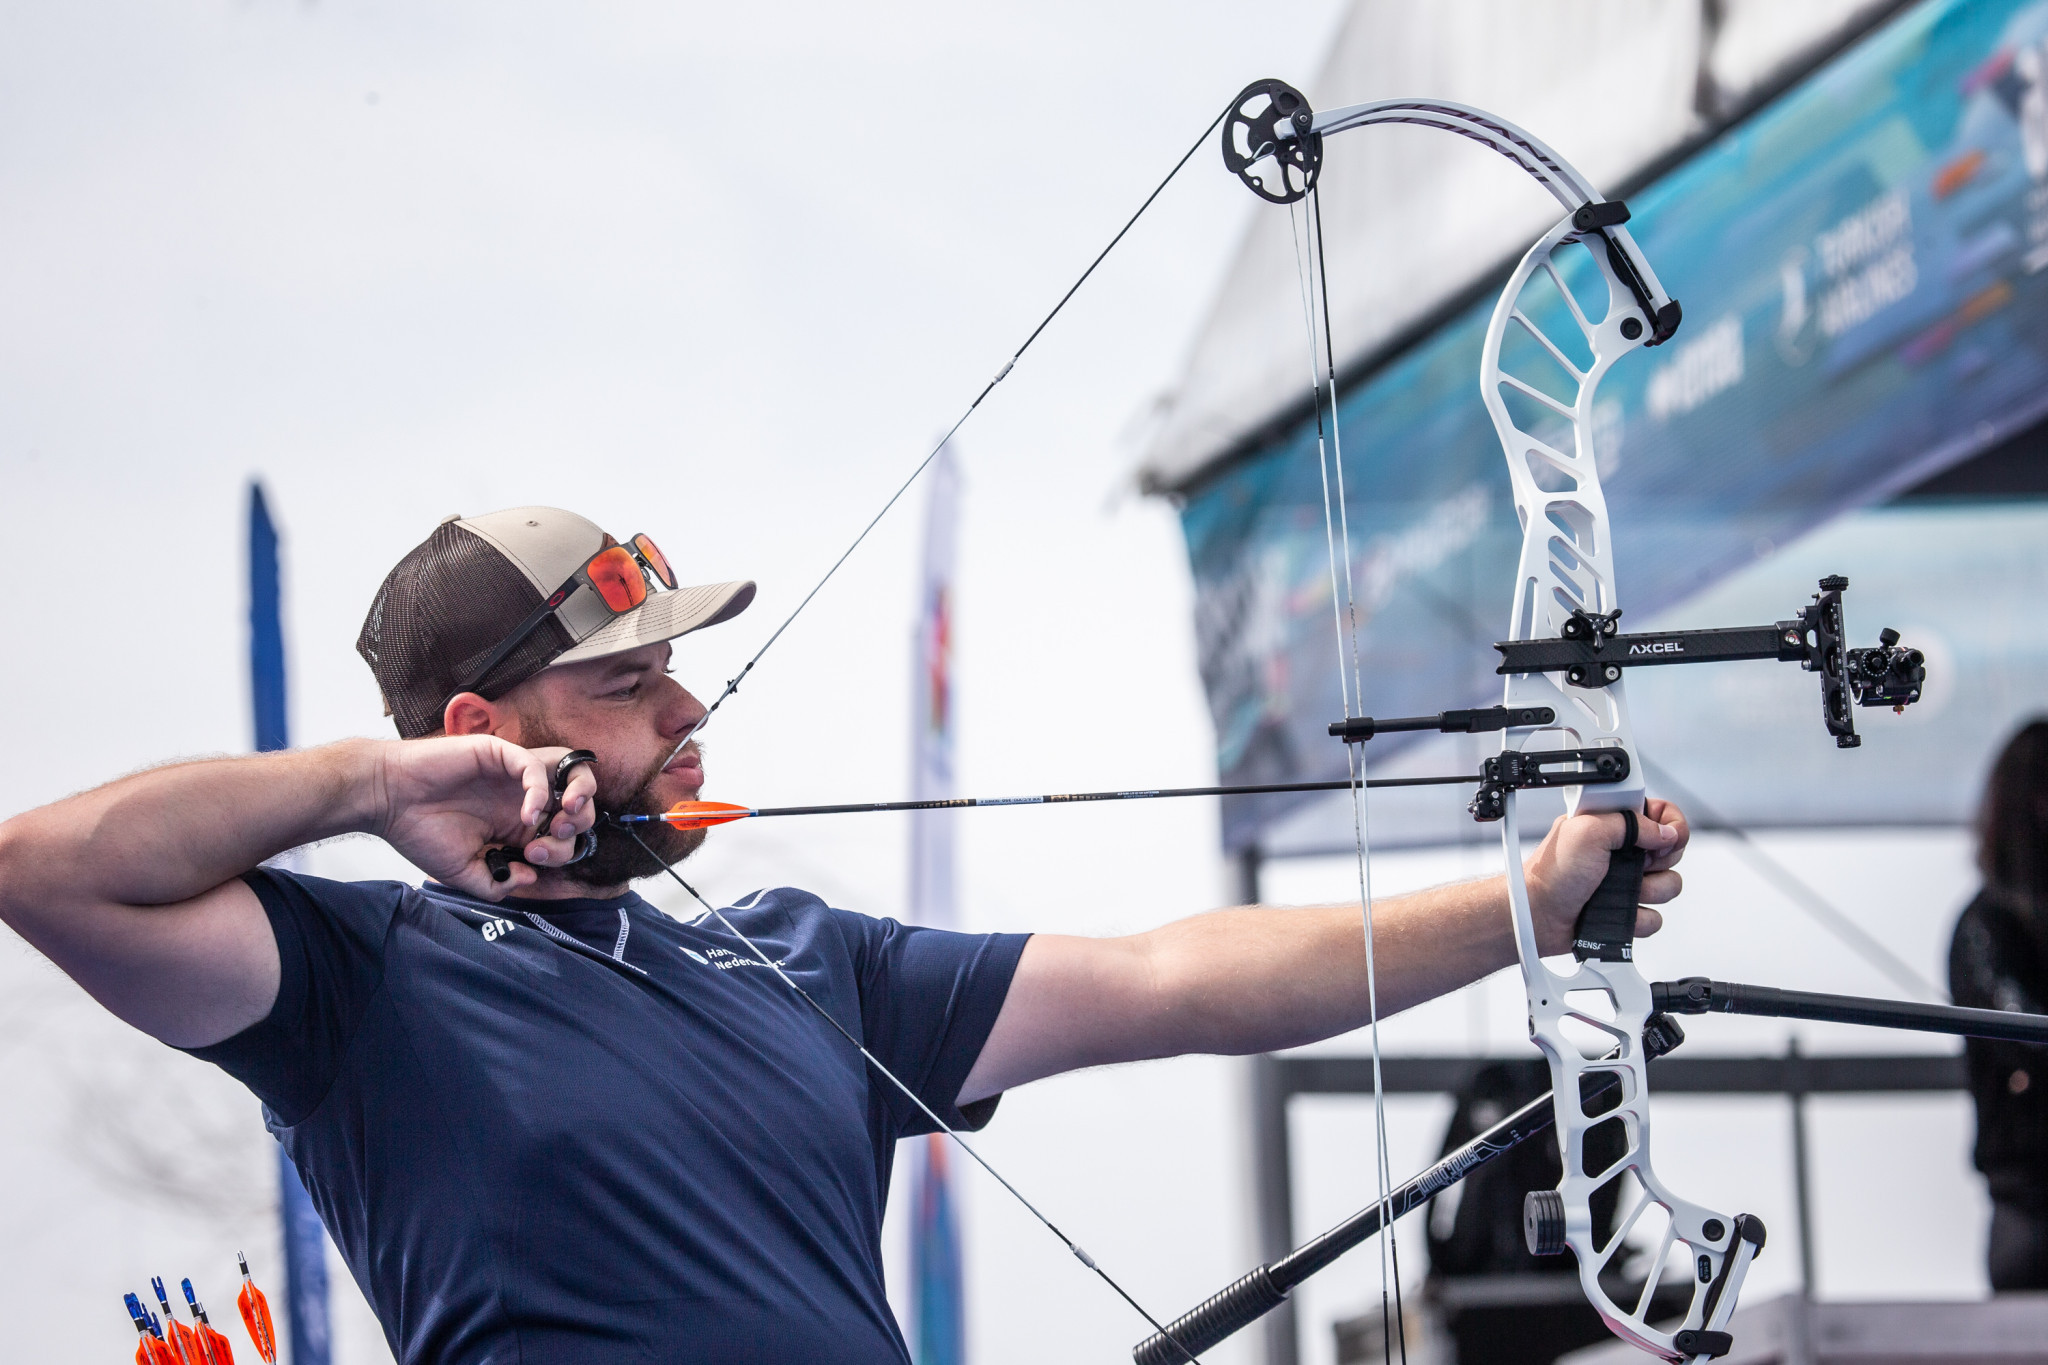 Schloesser and López take compound top seeds at Archery World Cup in Gwangju